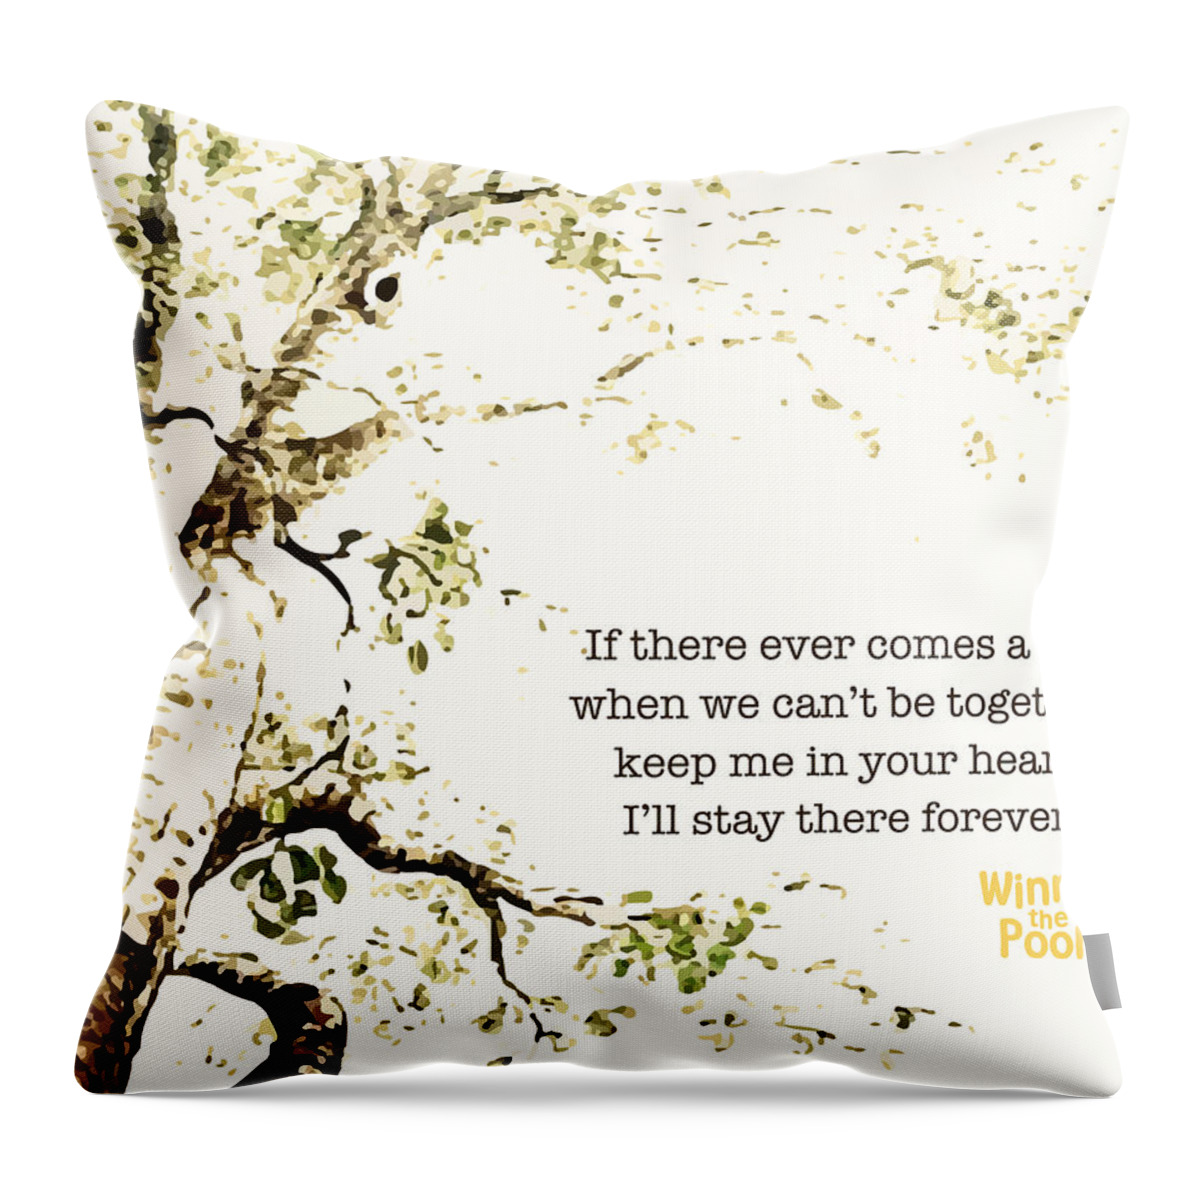 Winnie The Pooh Throw Pillow featuring the digital art Keep Me In Your Heart by Nancy Ingersoll